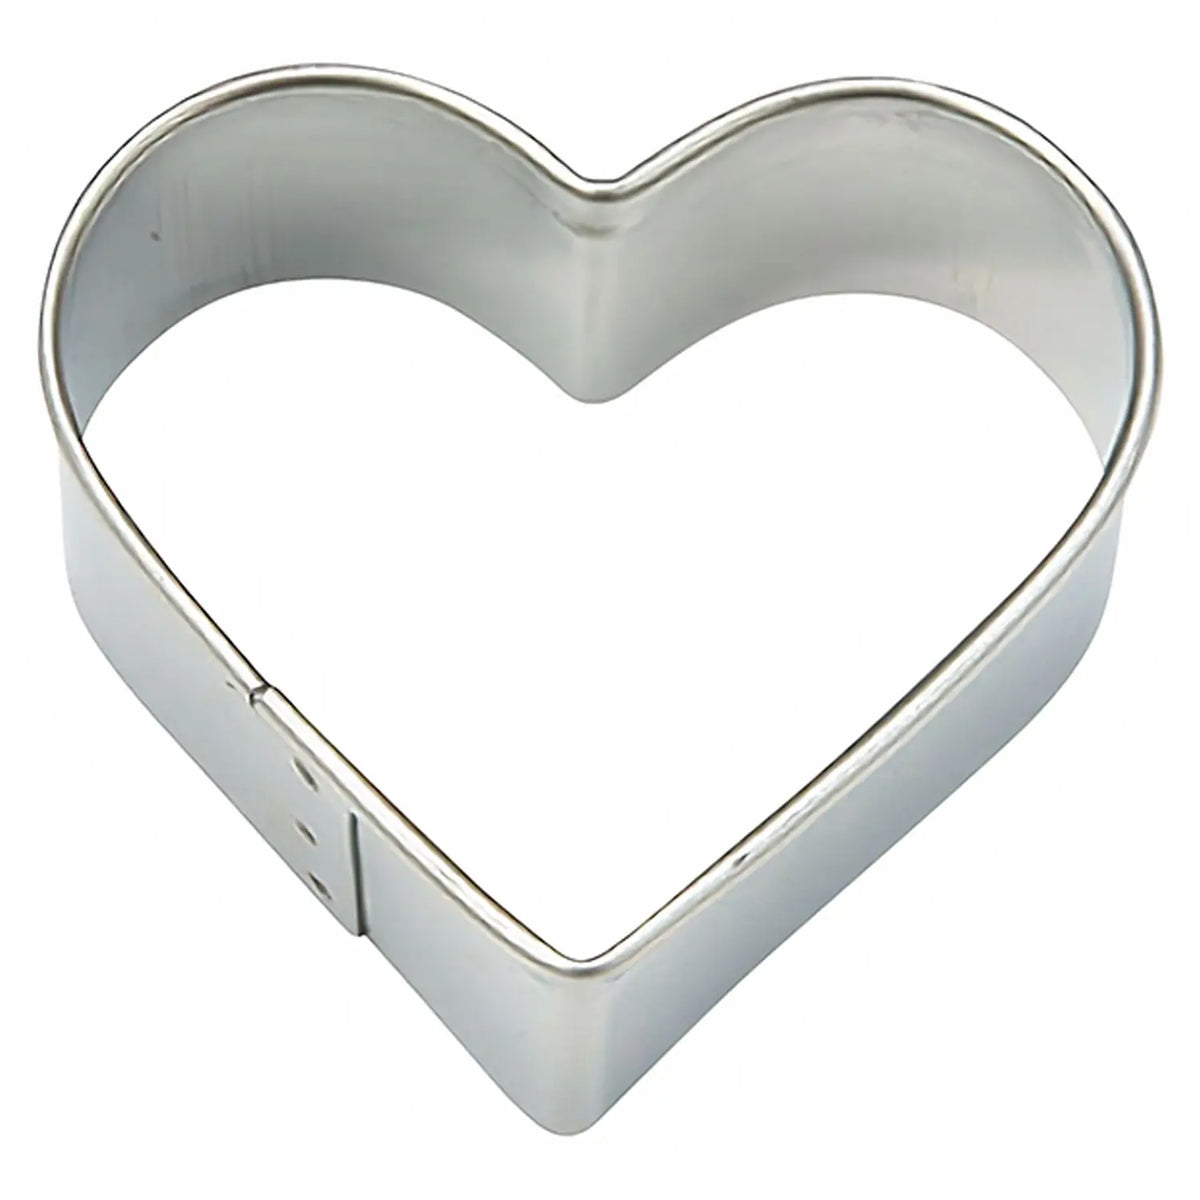 TIGERCROWN Cake Land Stainless Steel Cookie Cutter Heart